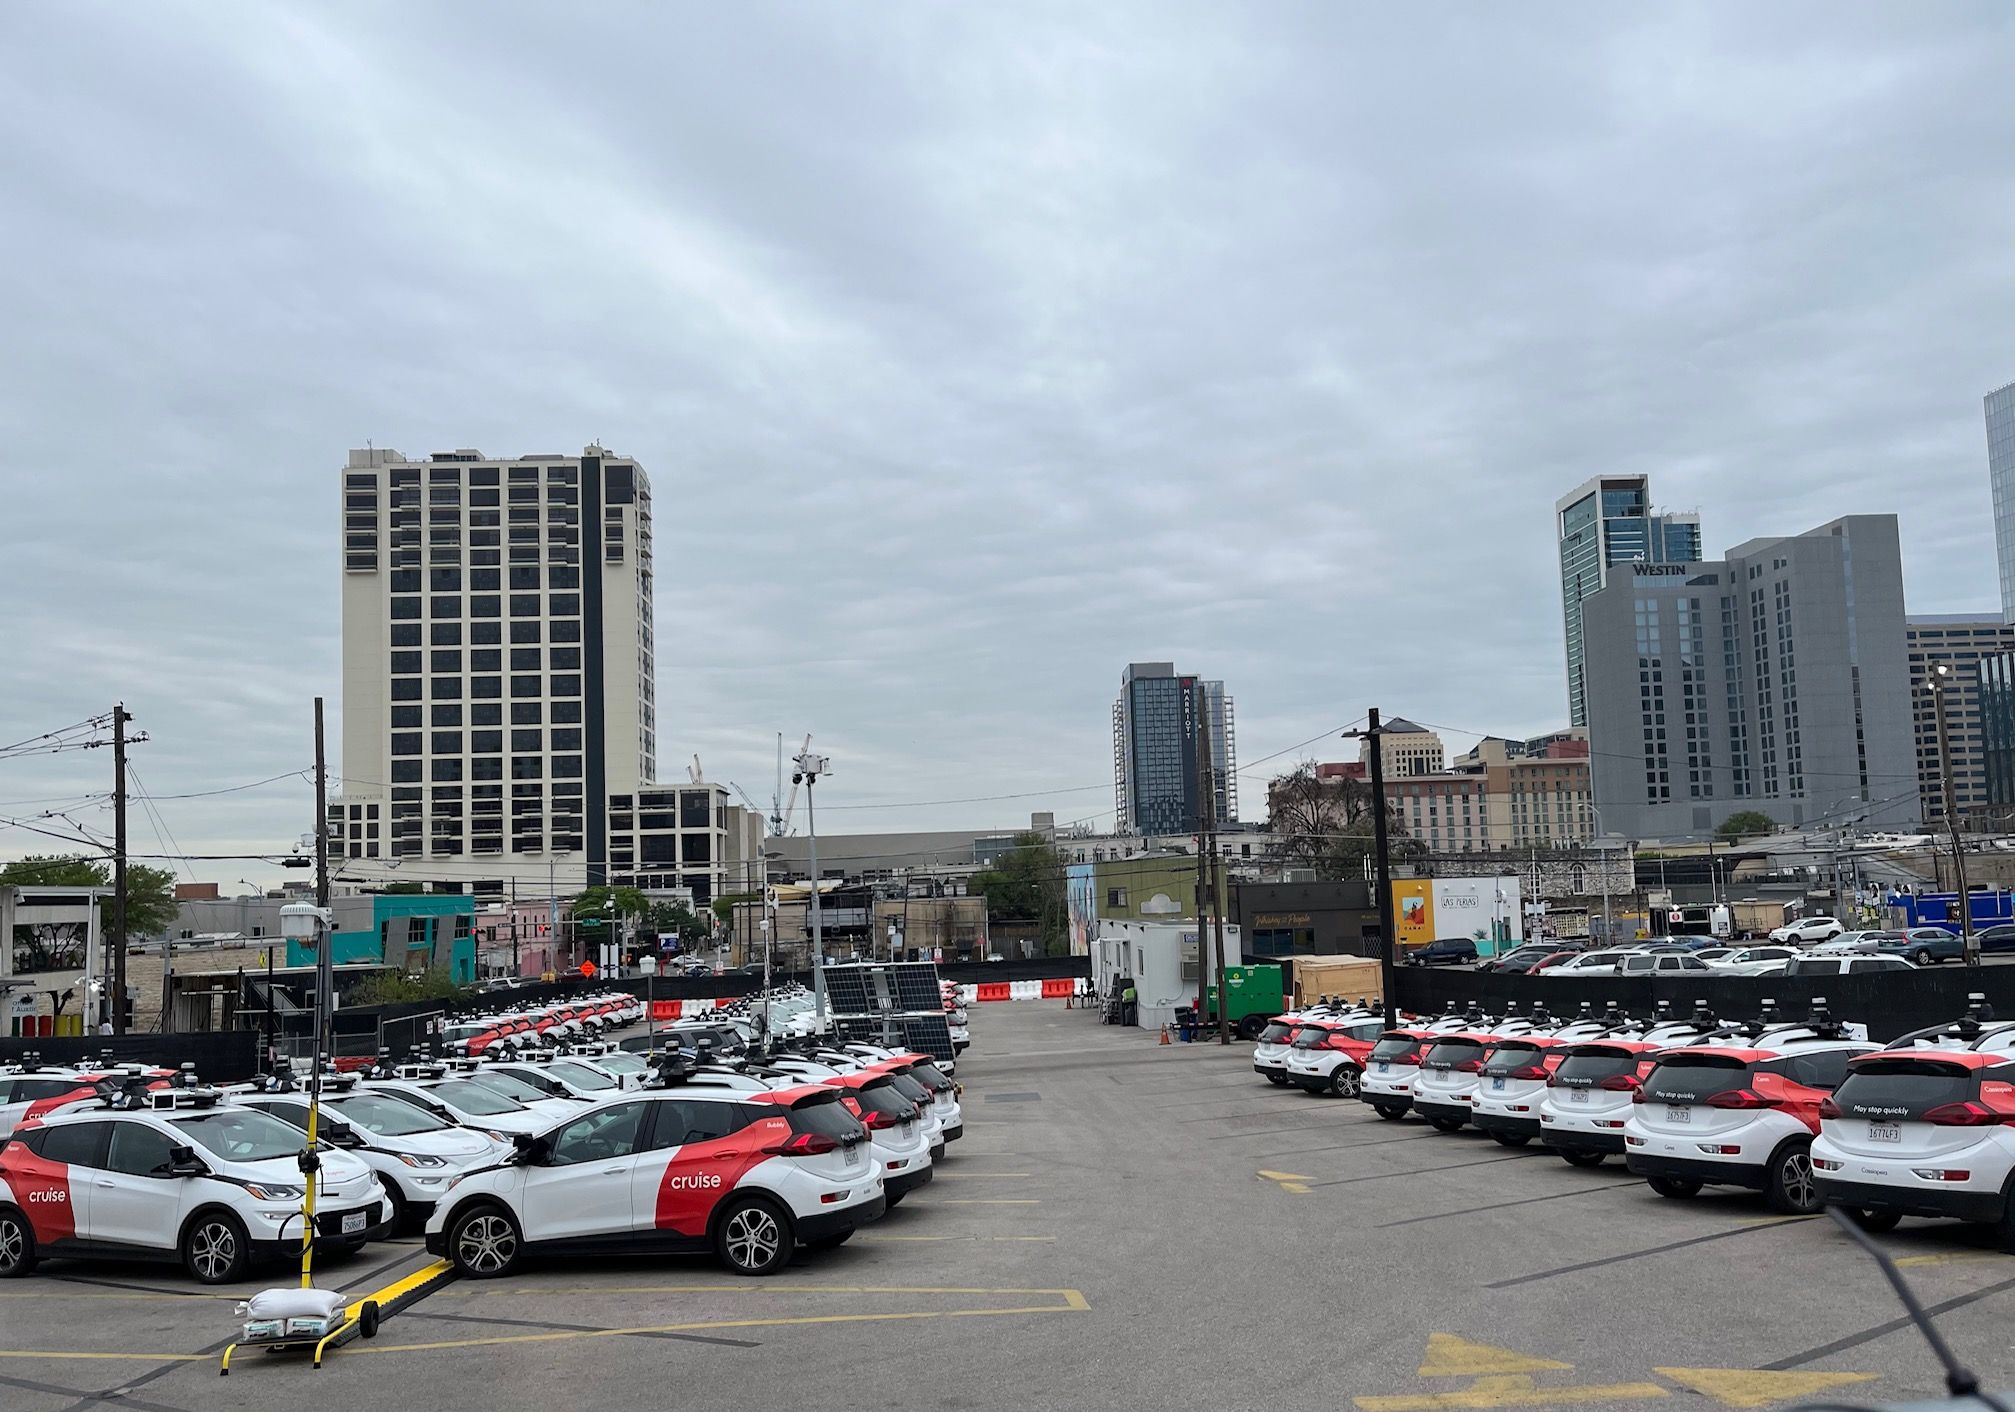 A parking lot full of cars in downtown Austin.